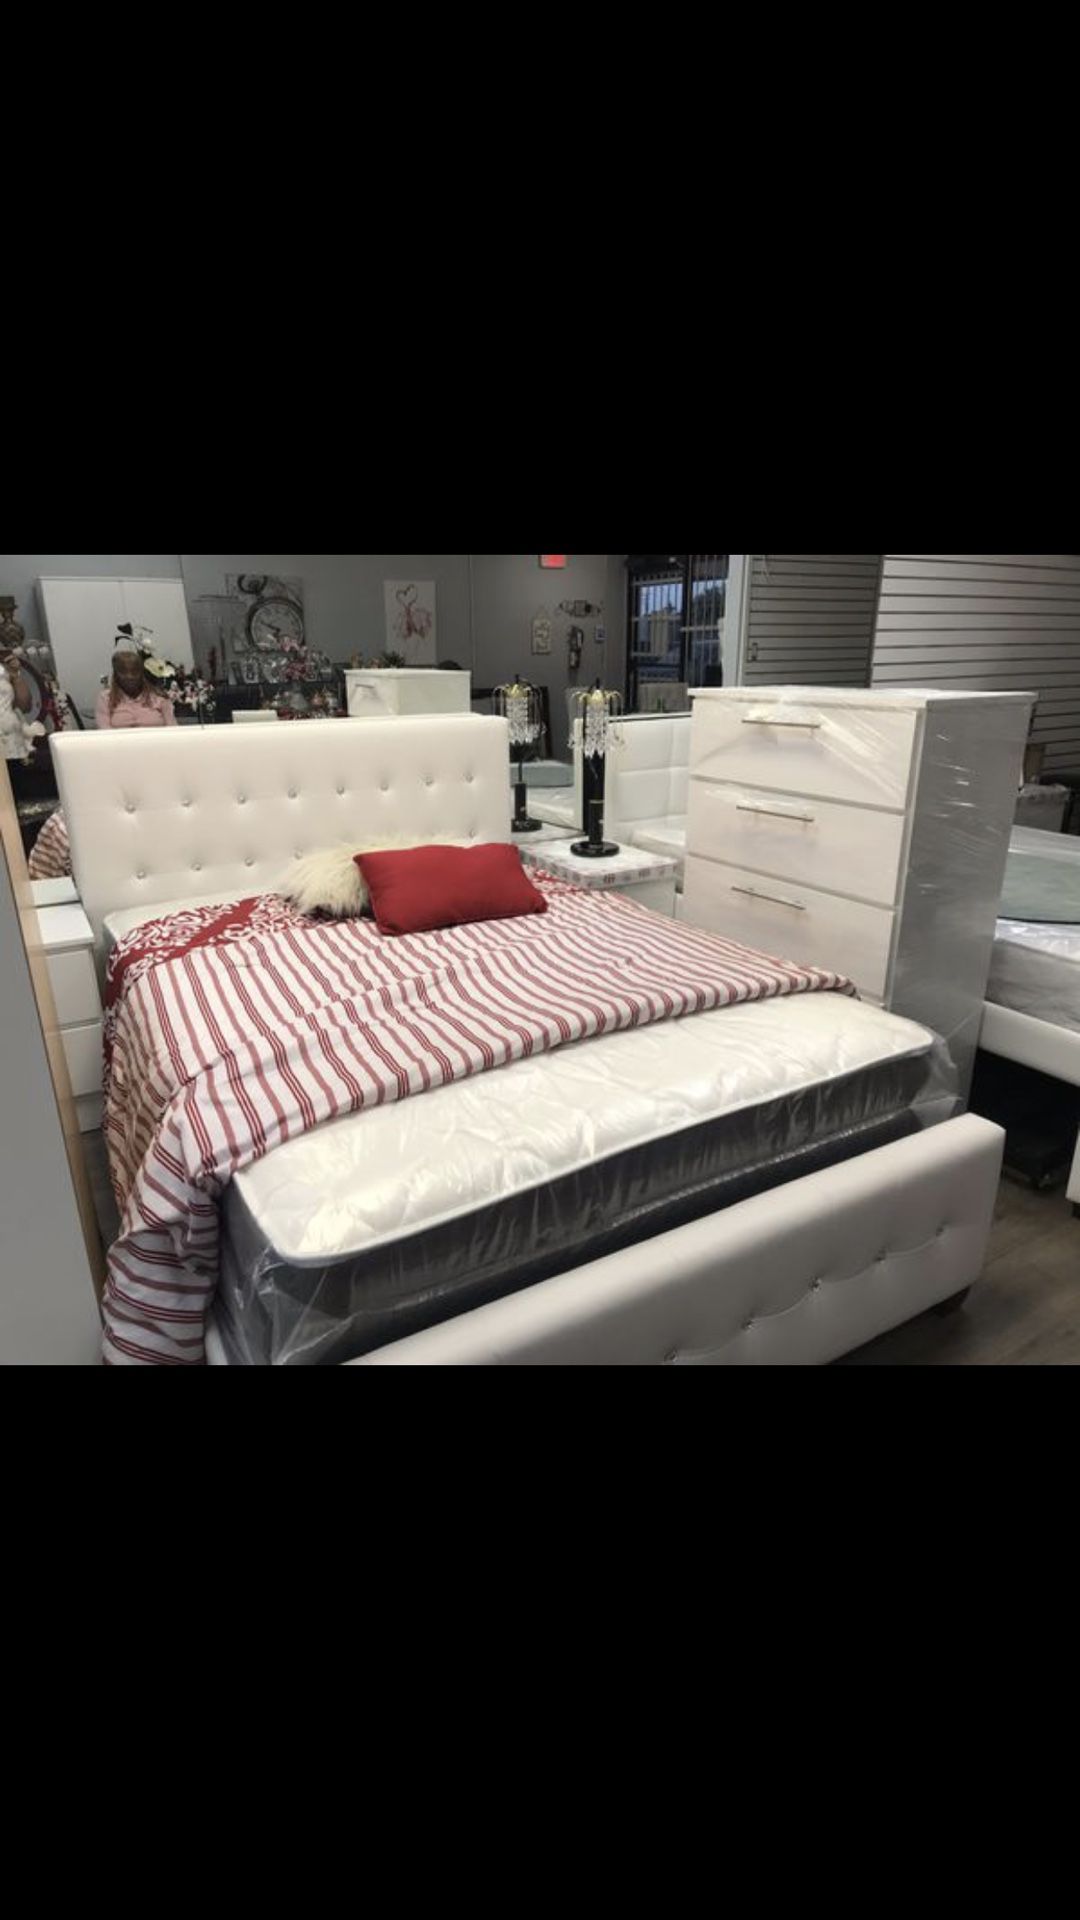 6 pc diamond bedroom set newnew queen size ••mattress sold separately